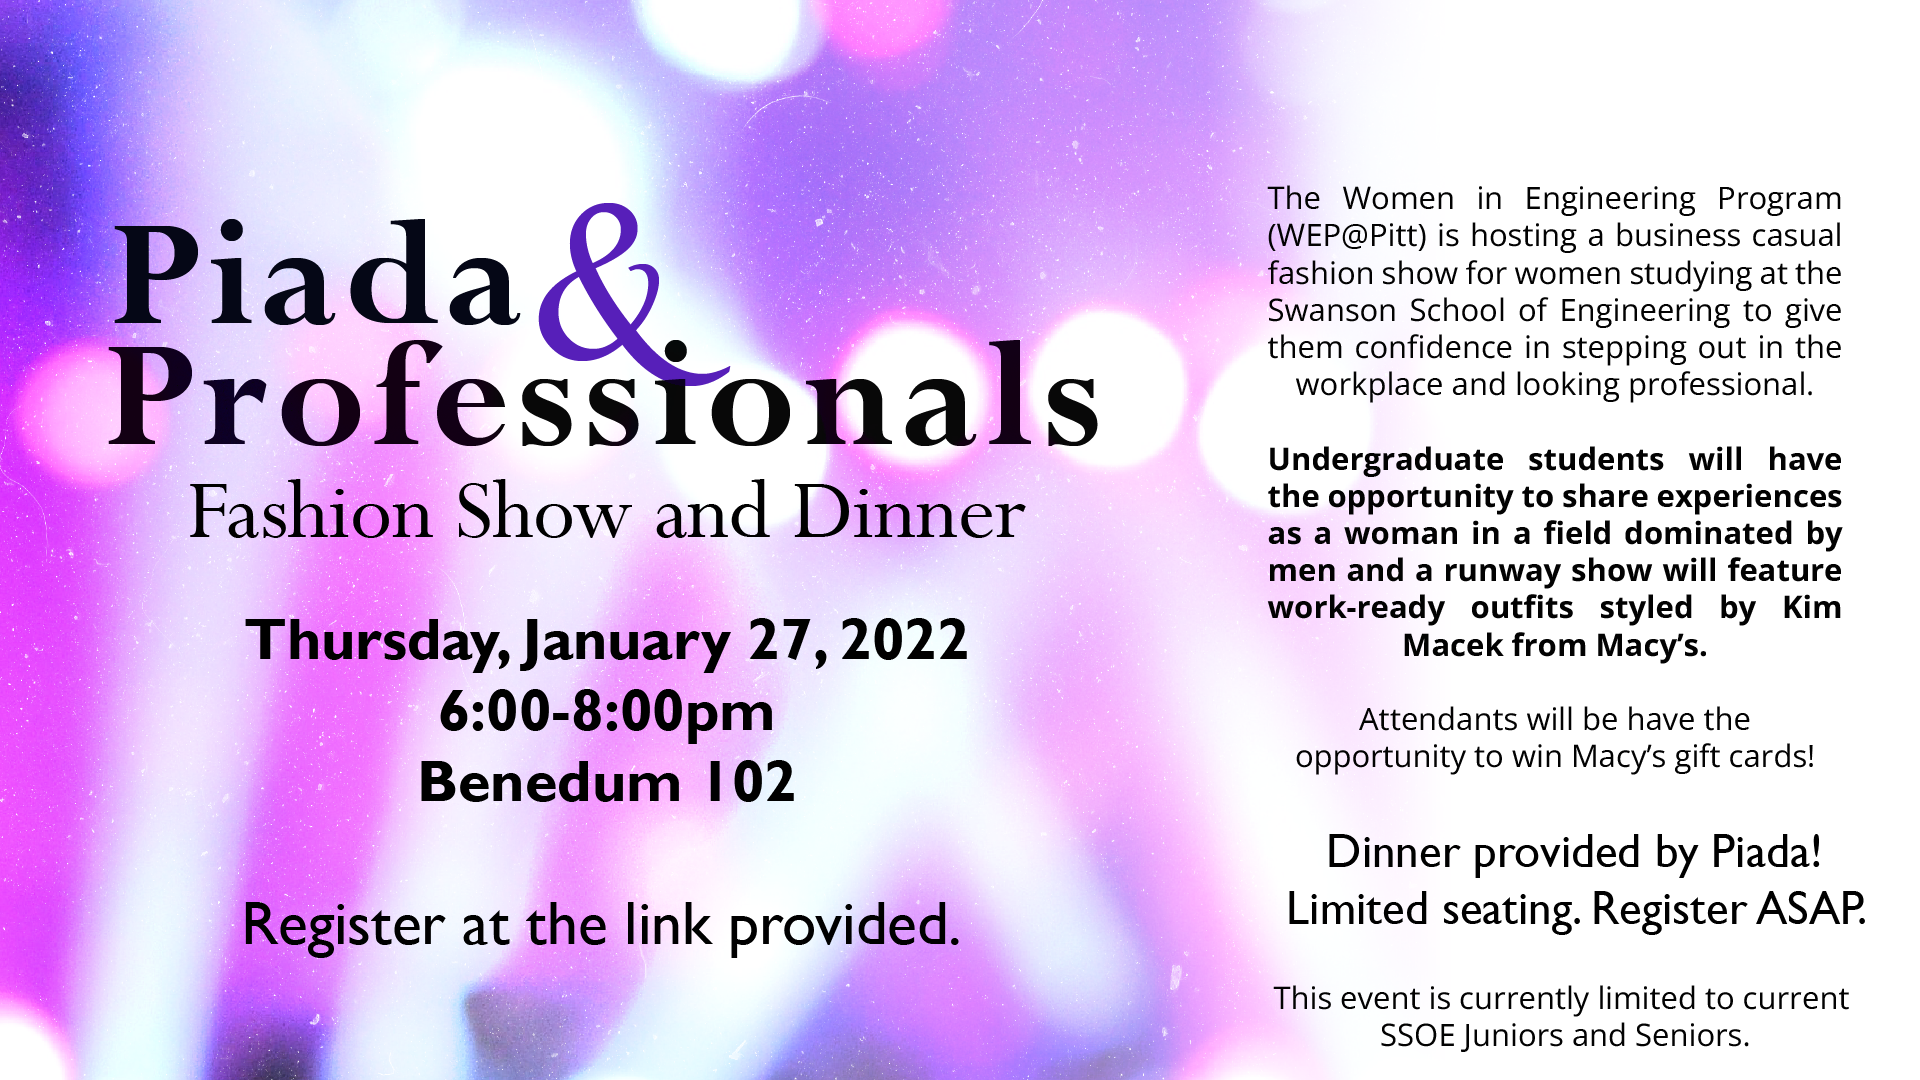 Piada and Professionals old event flyer with event details about the business casual fashion show for women in engineering at Pitt